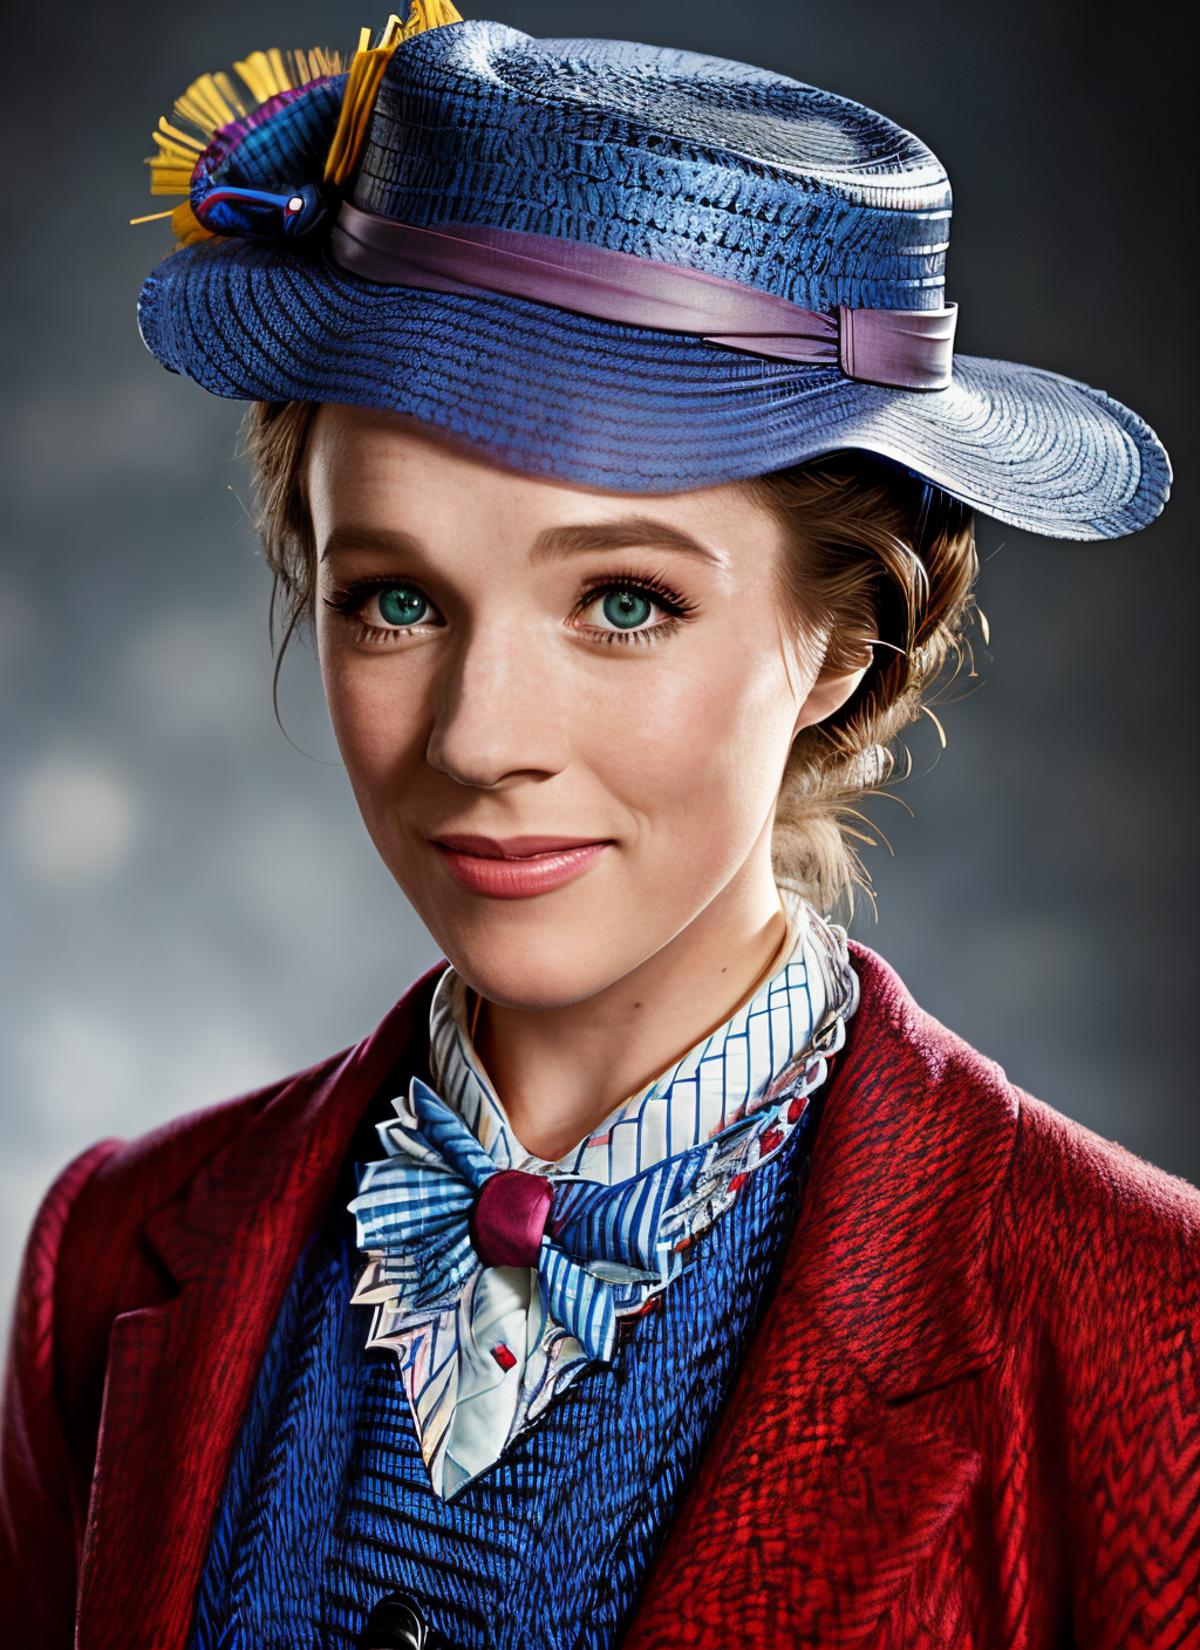 Julie Andrews (Mary Poppins and Maria von Trapp from The Sound of Music movies) image by astragartist